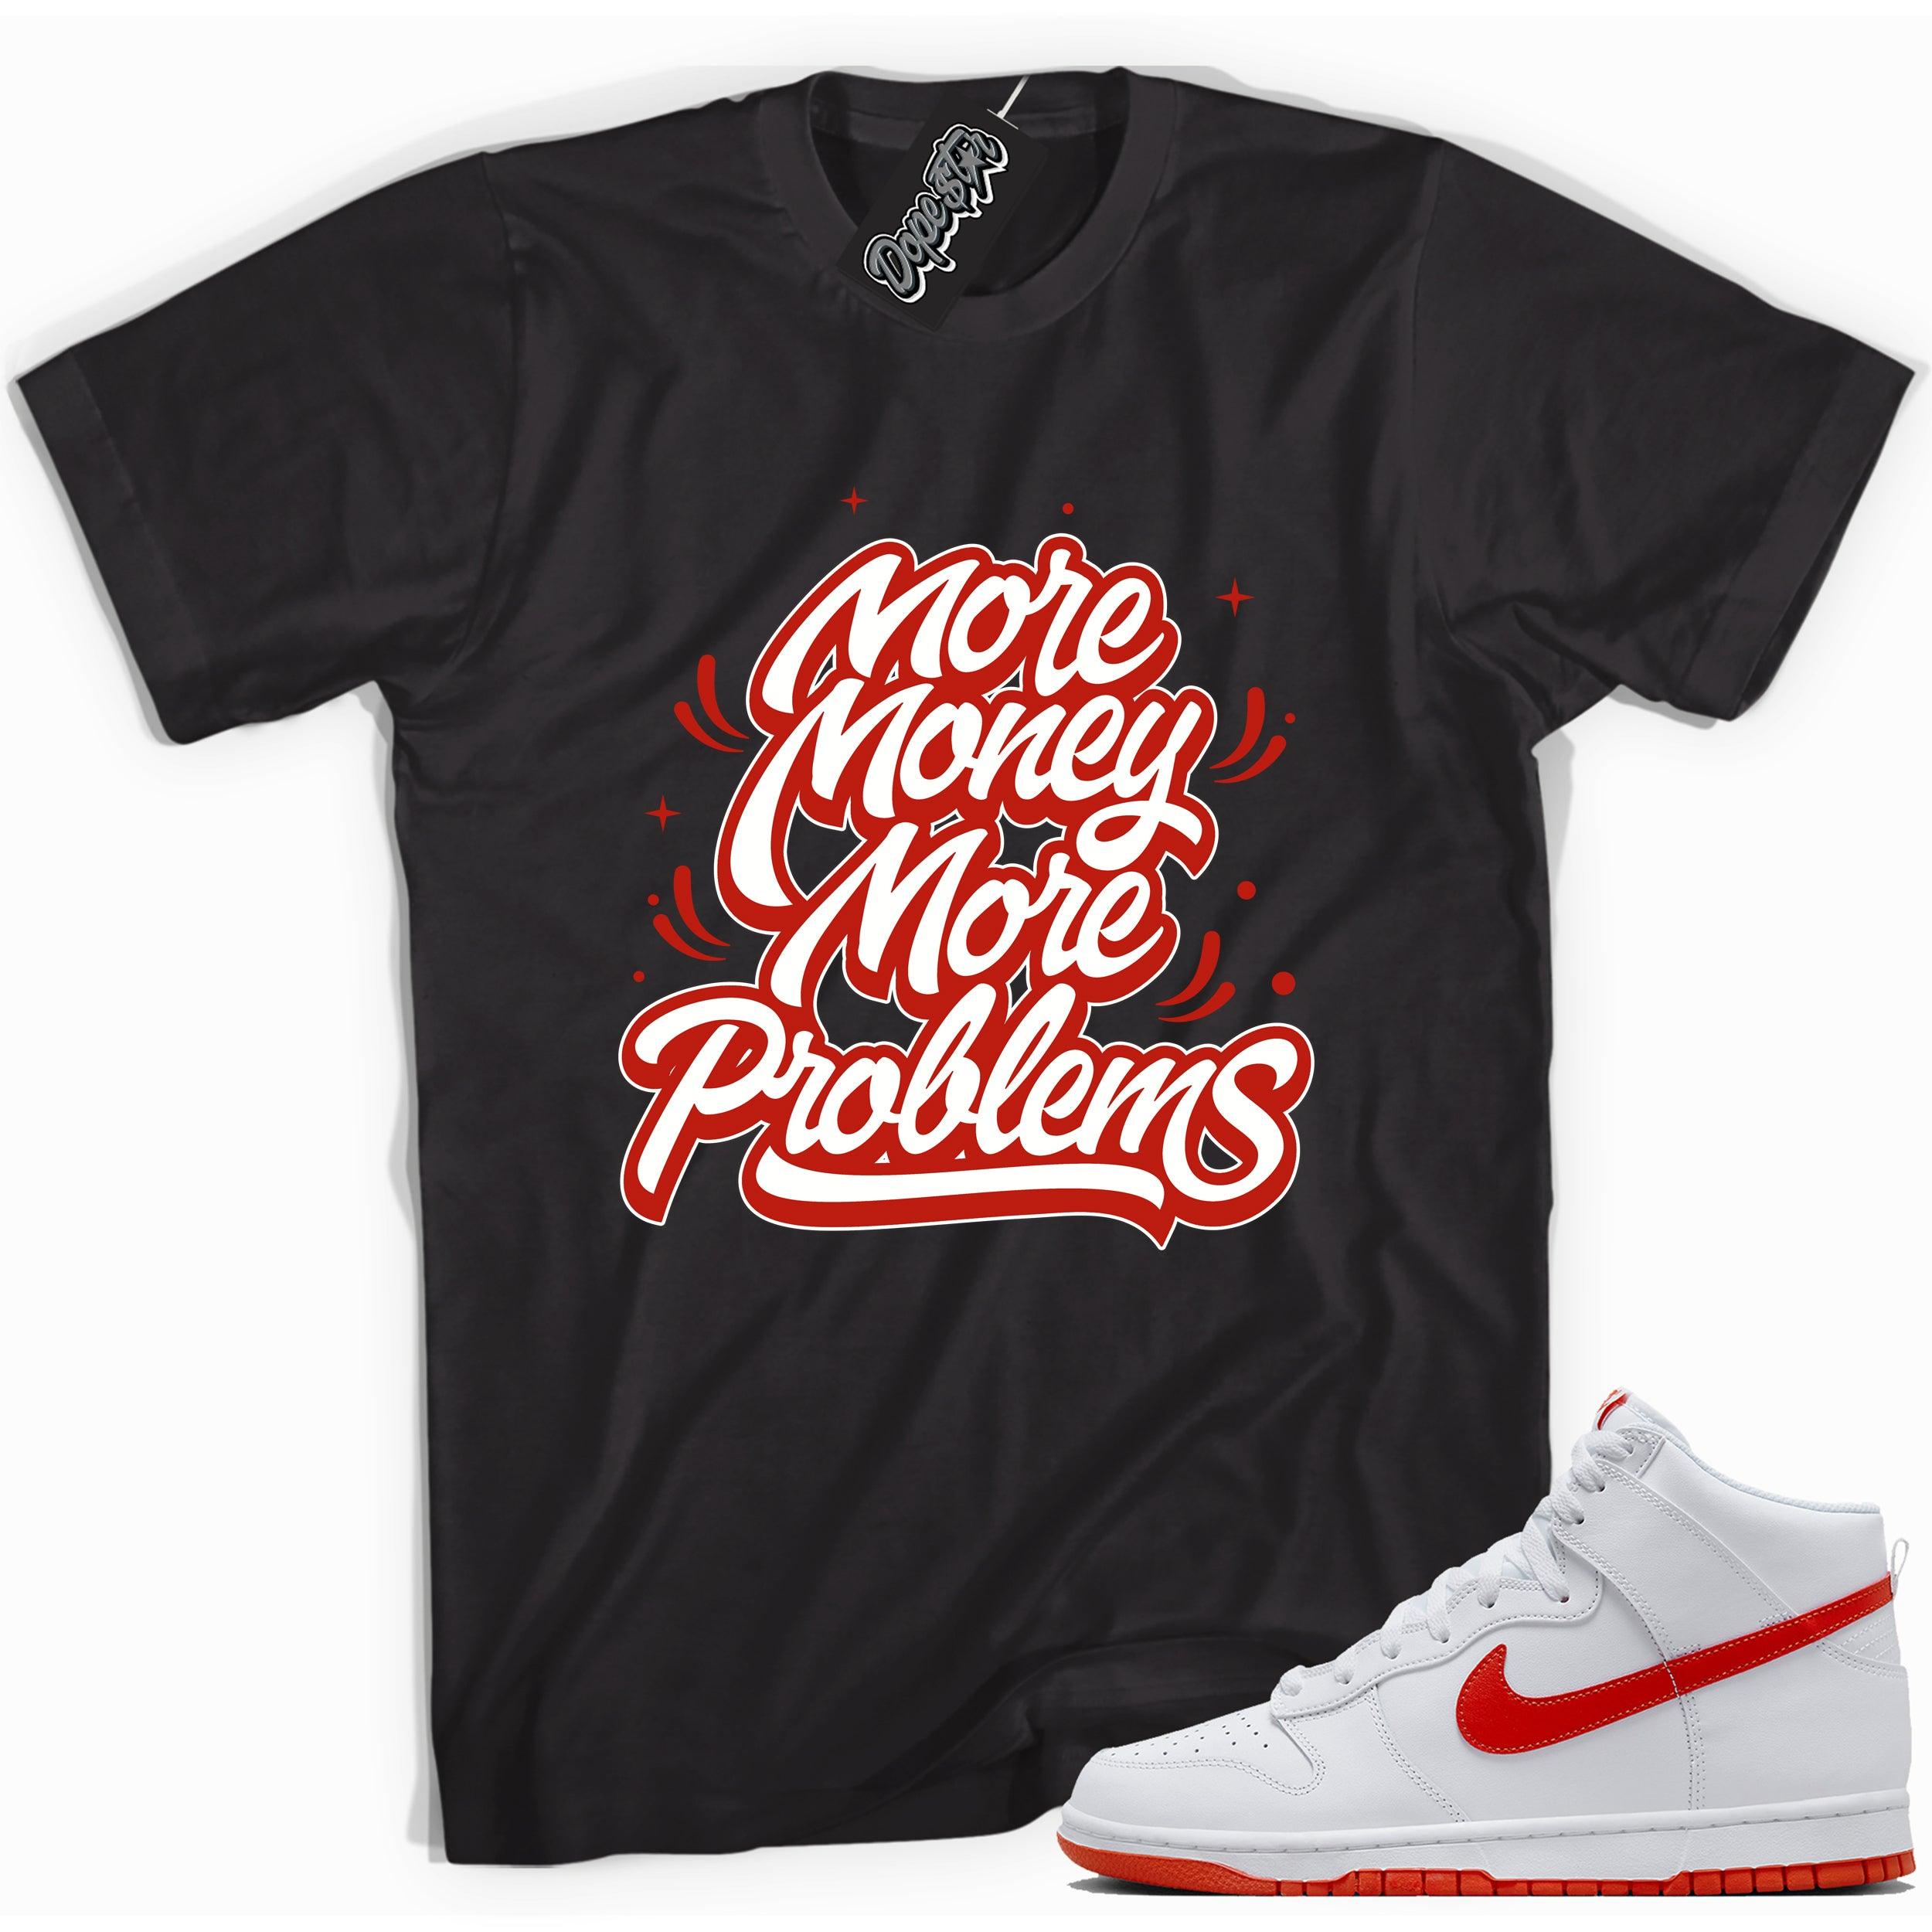 Cool black graphic tee with 'more money more problems' print, that perfectly matches Nike Dunk High White Picante Red sneakers.